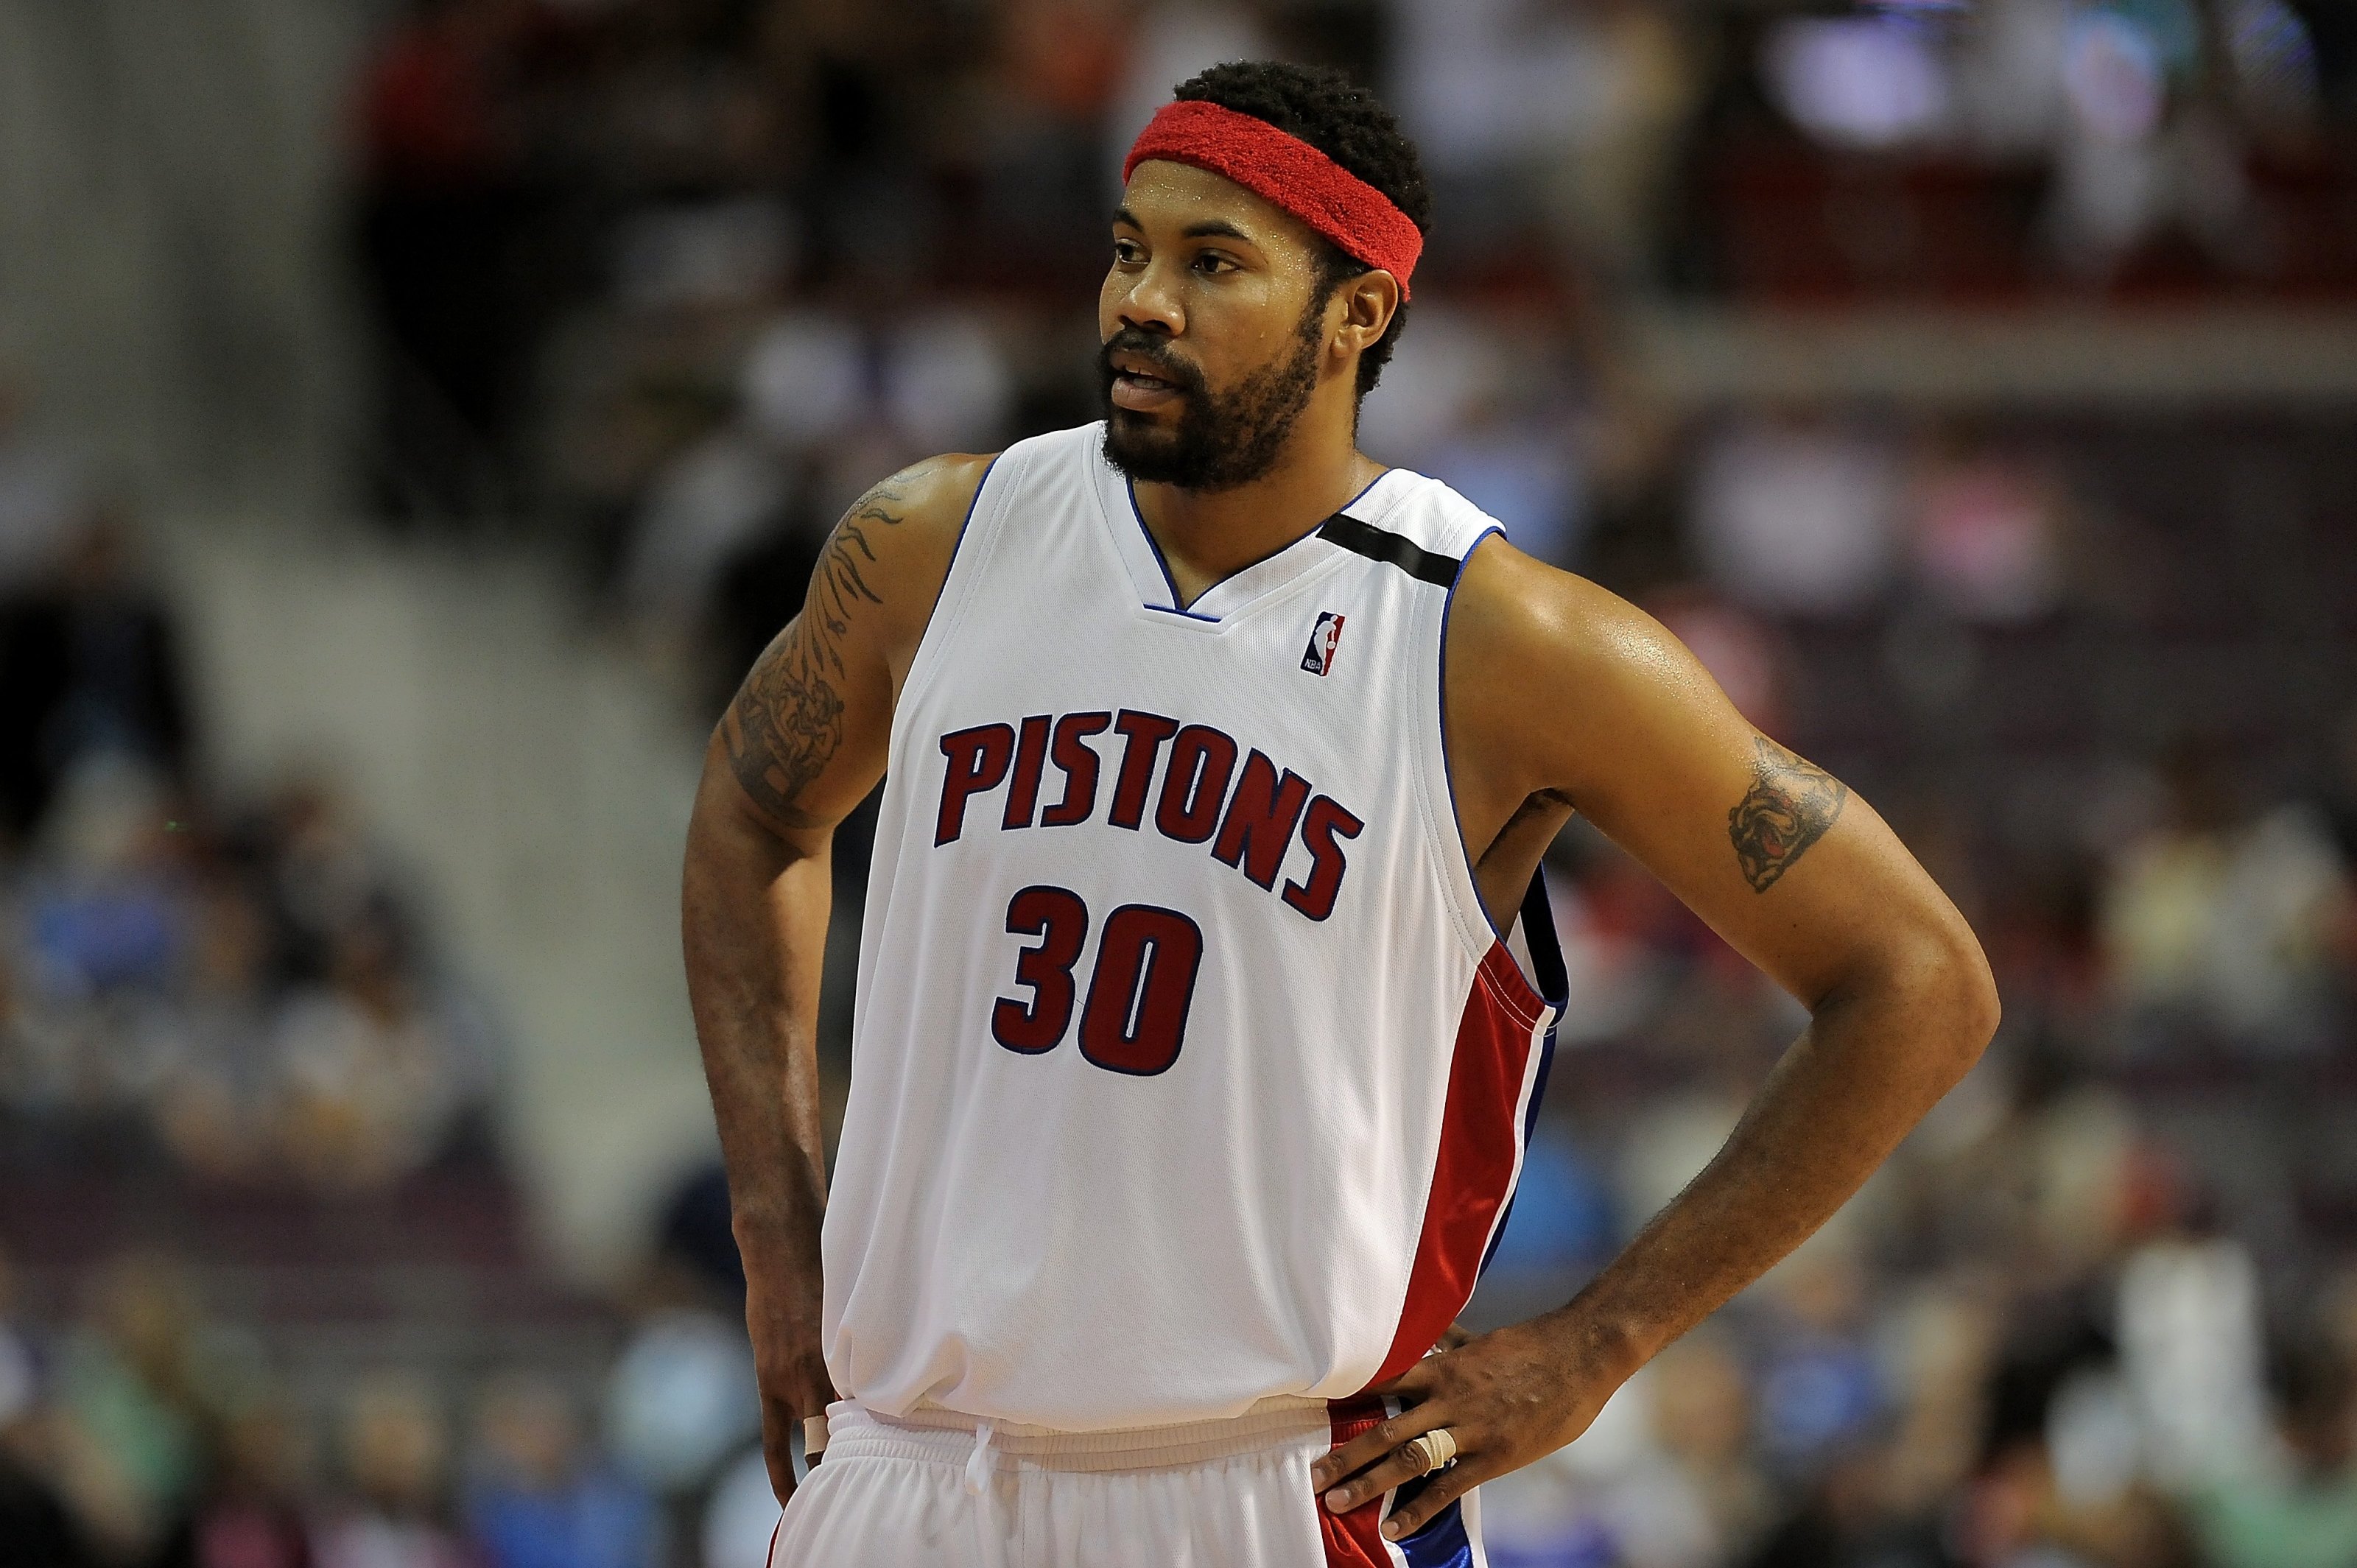 Rasheed Wallace hired as high school basketball coach - Sports Illustrated